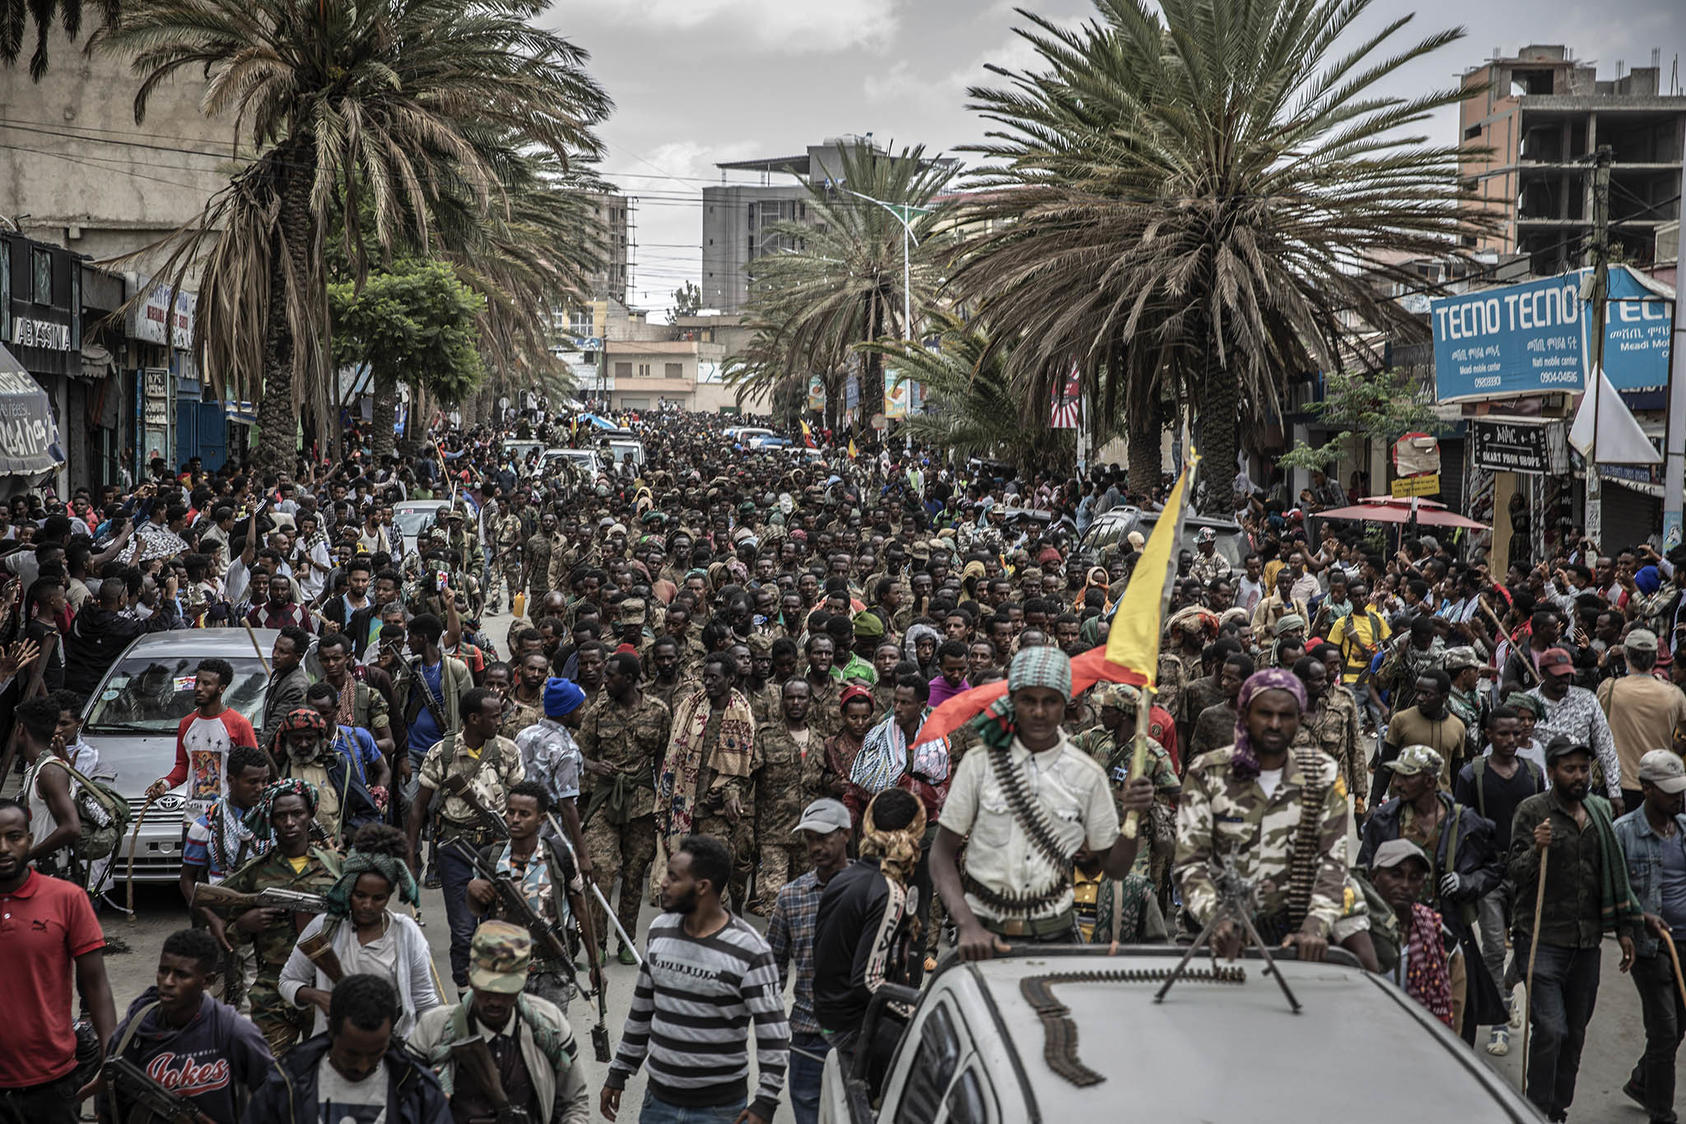 Tigrayan rebels march defeated Ethiopian troops through Tigray’s regional capital in 2021, amid the civil war that has now seen a truce. Atrocities committed in the war complicate efforts toward a full peace accord. (Finbarr O'Reilly/The New York Times)